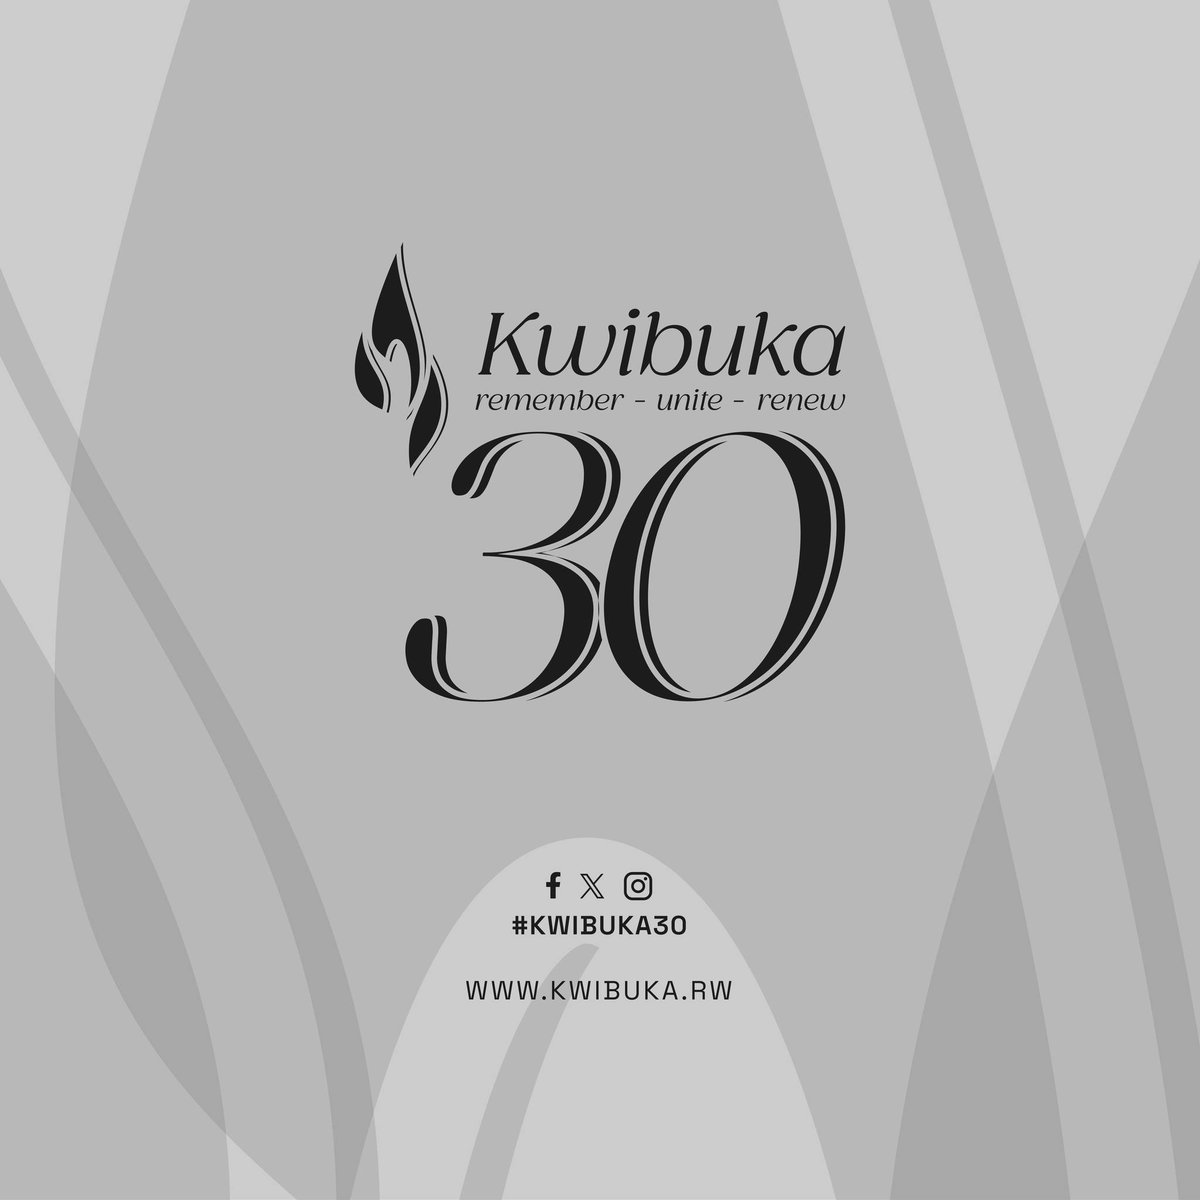 I'm here in Kigali on April 7th. The honour isn't being here for the beginning of #Kwibuka30 but being with Rwandans I've known & cared about for so many years & show them that their pain wont be forgotten or easily dismissed as they mourn those lost in Genocide against the Tutsi